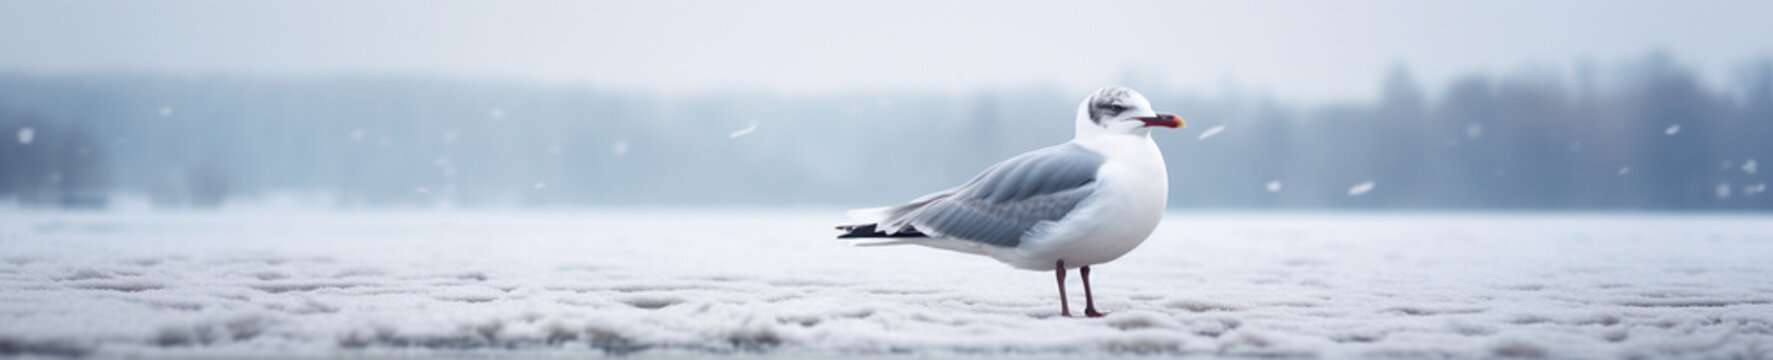 A Banner Photo of a Seagull in a Winter Setting